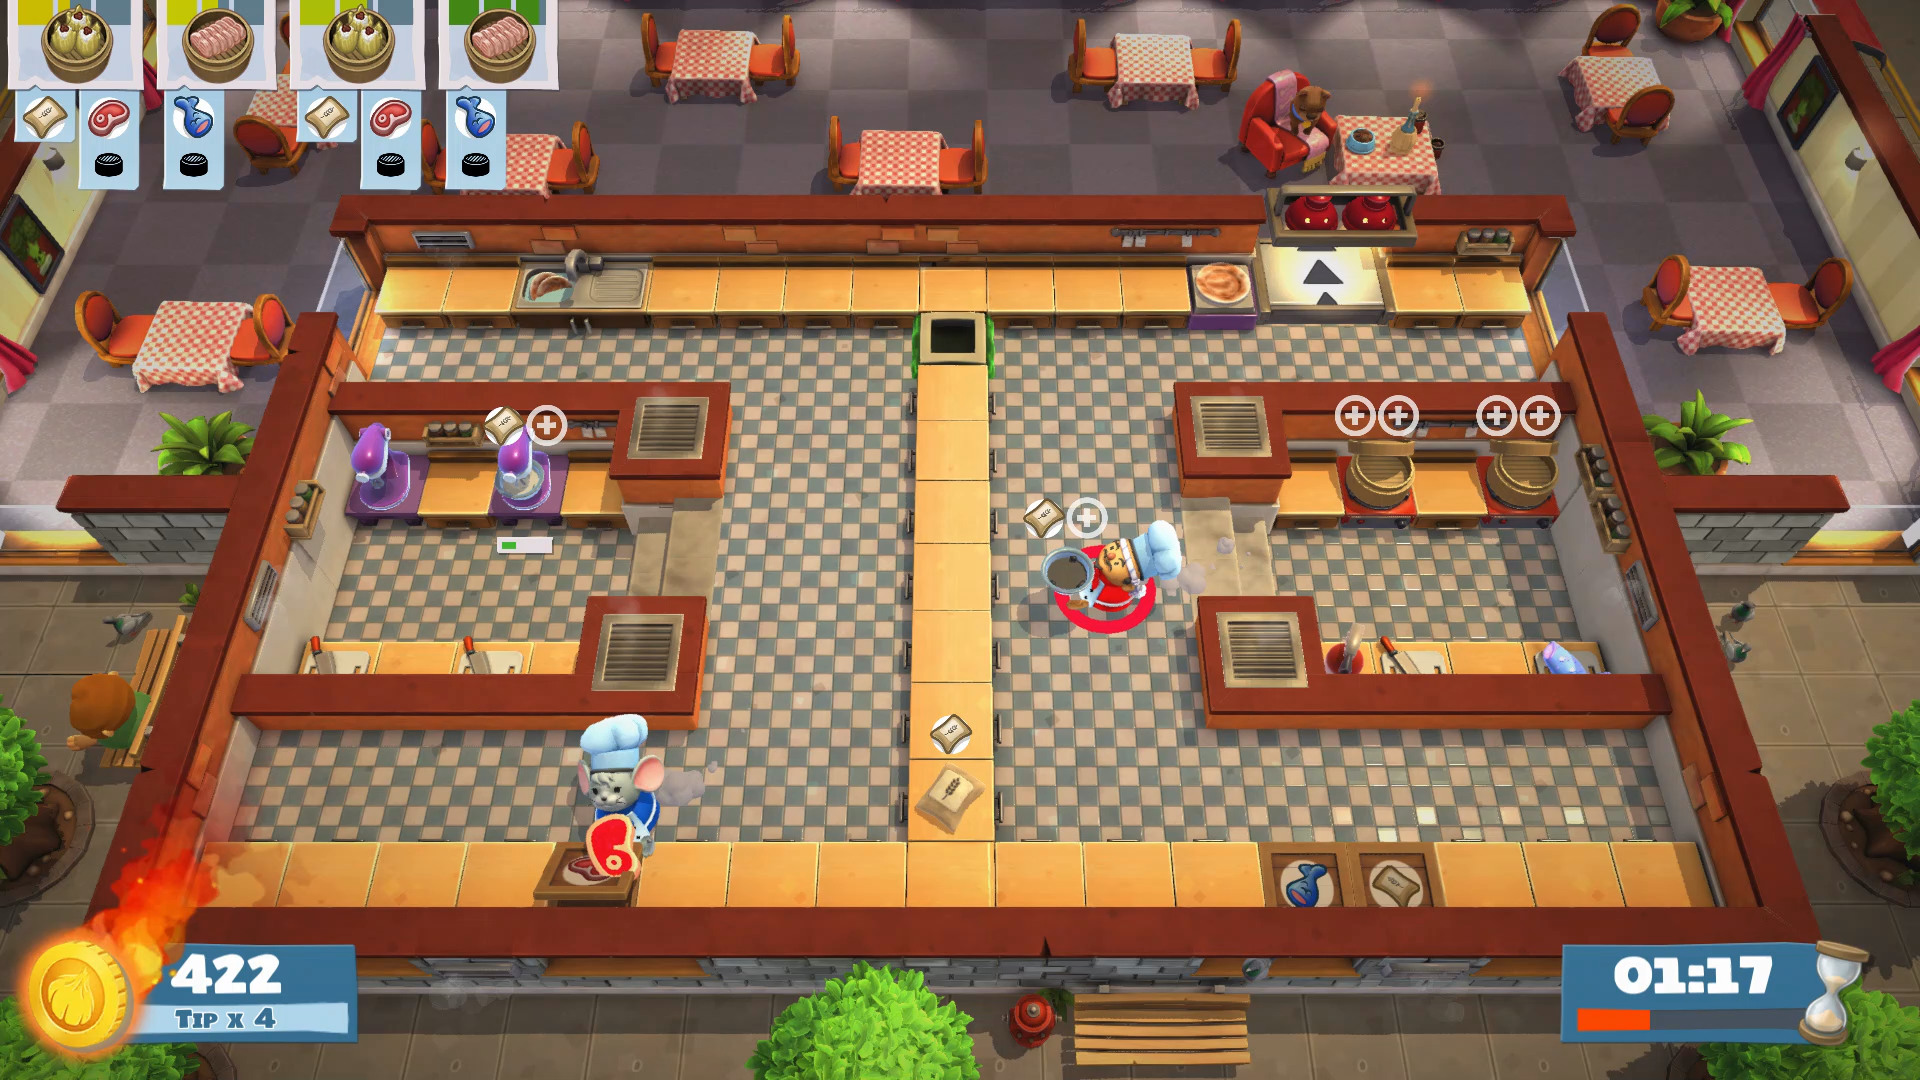 overcooked 2 switch 4 player local